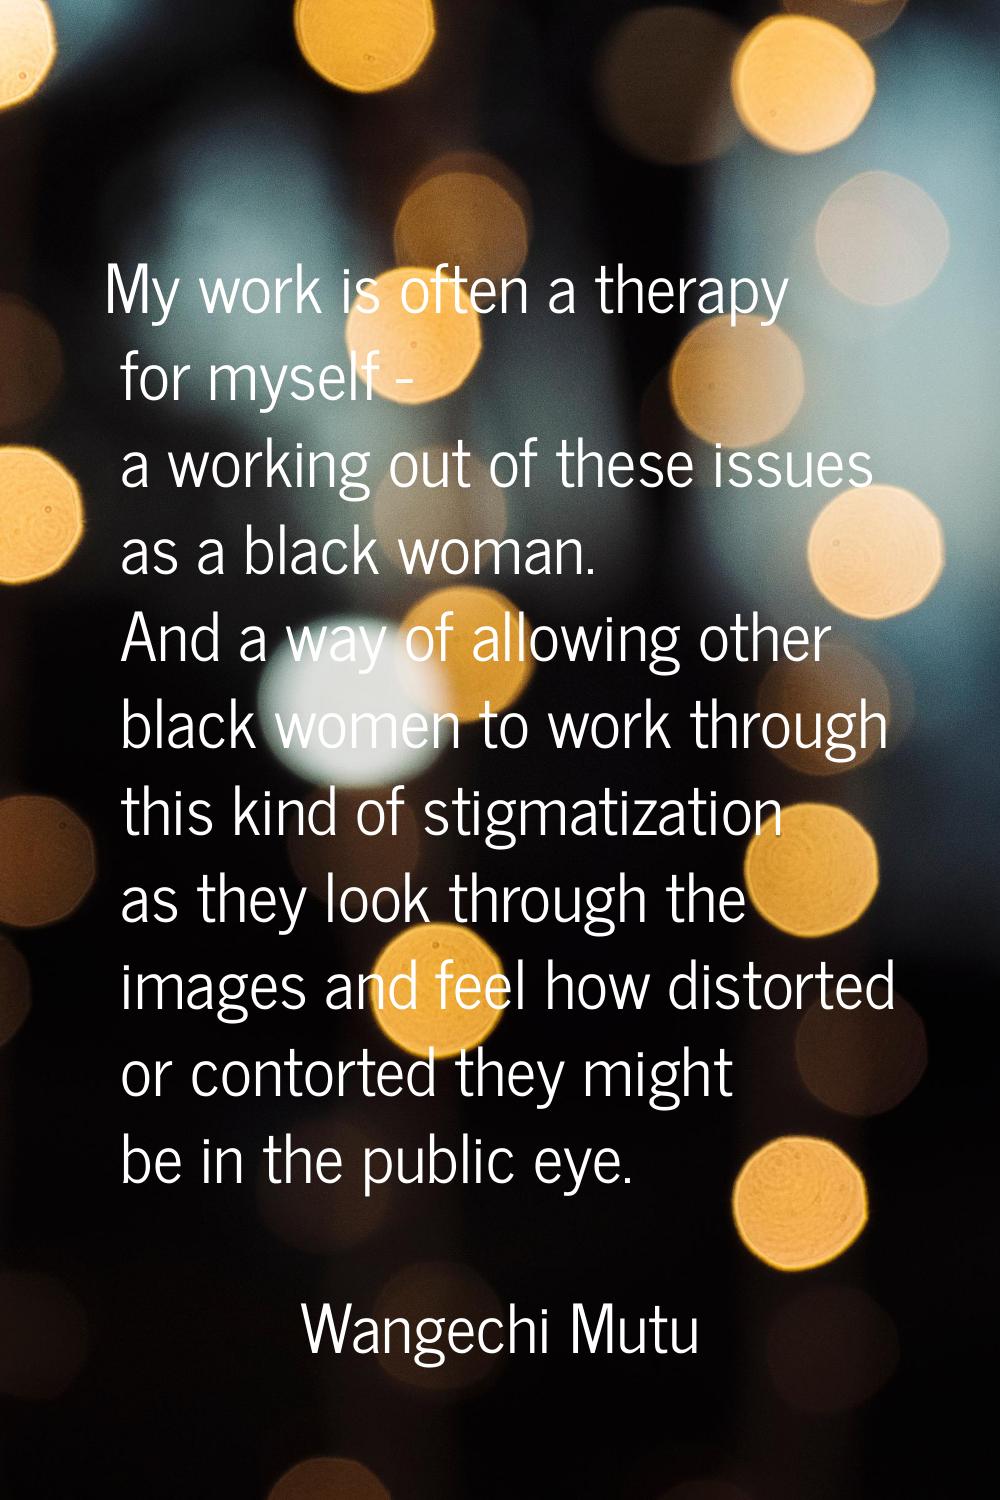 My work is often a therapy for myself - a working out of these issues as a black woman. And a way o